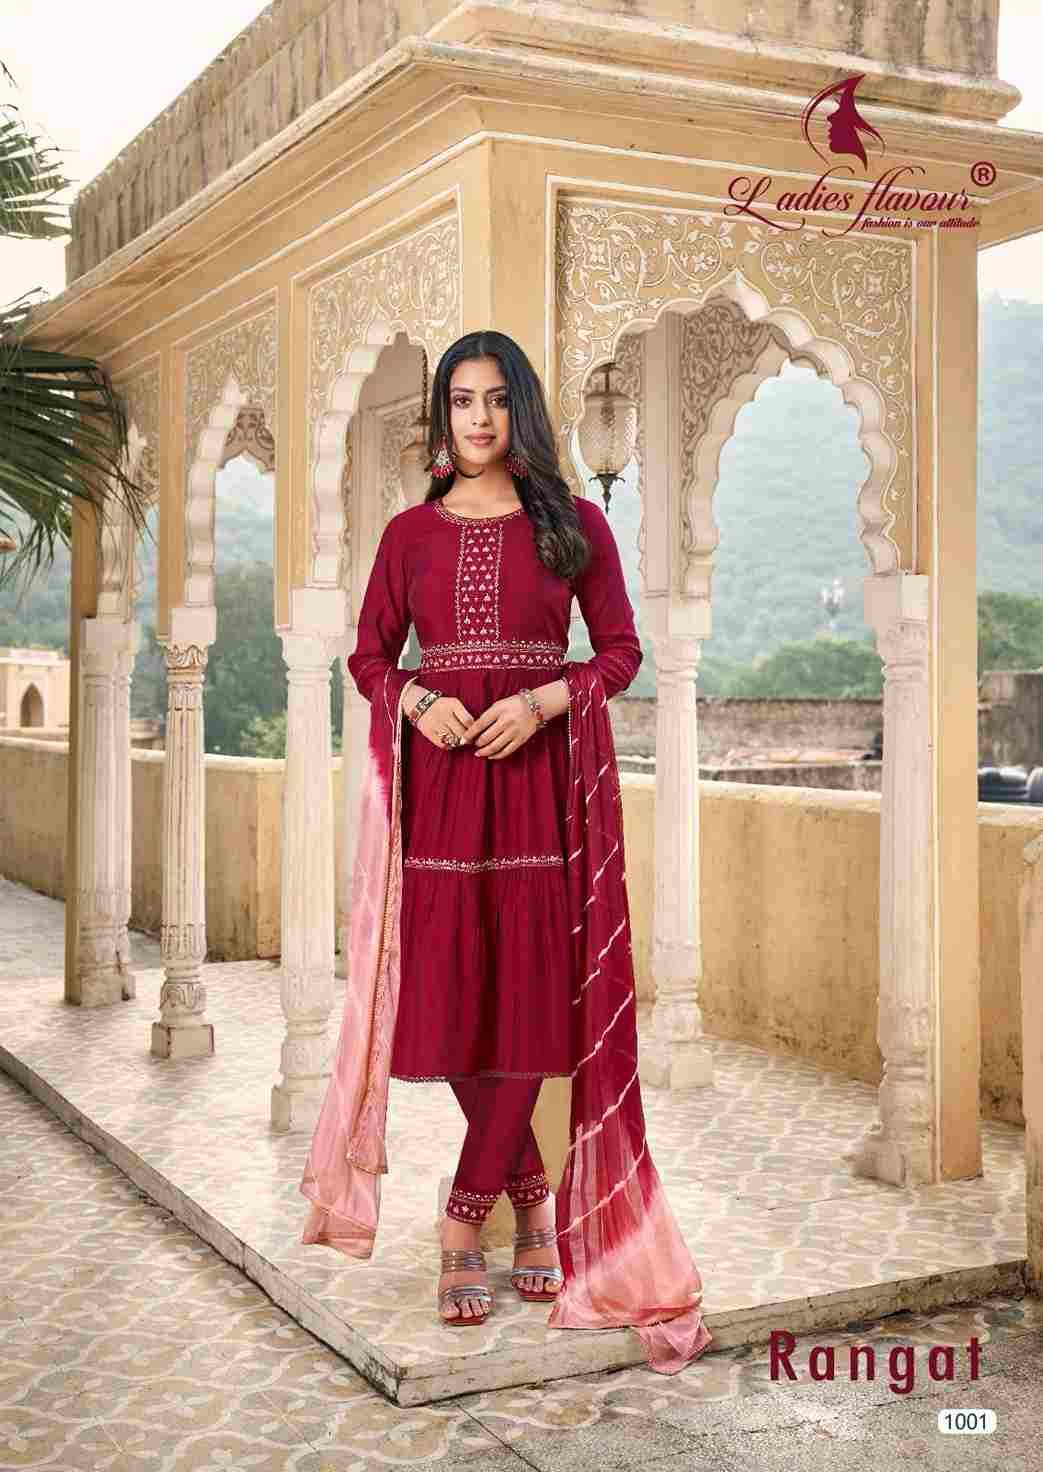 Rangat By Ladies Flavour 1001 To 1004 Series Beautiful Stylish Festive Suits Fancy Colorful Casual Wear & Ethnic Wear & Ready To Wear Viscose Chanderi Print Dresses At Wholesale Price